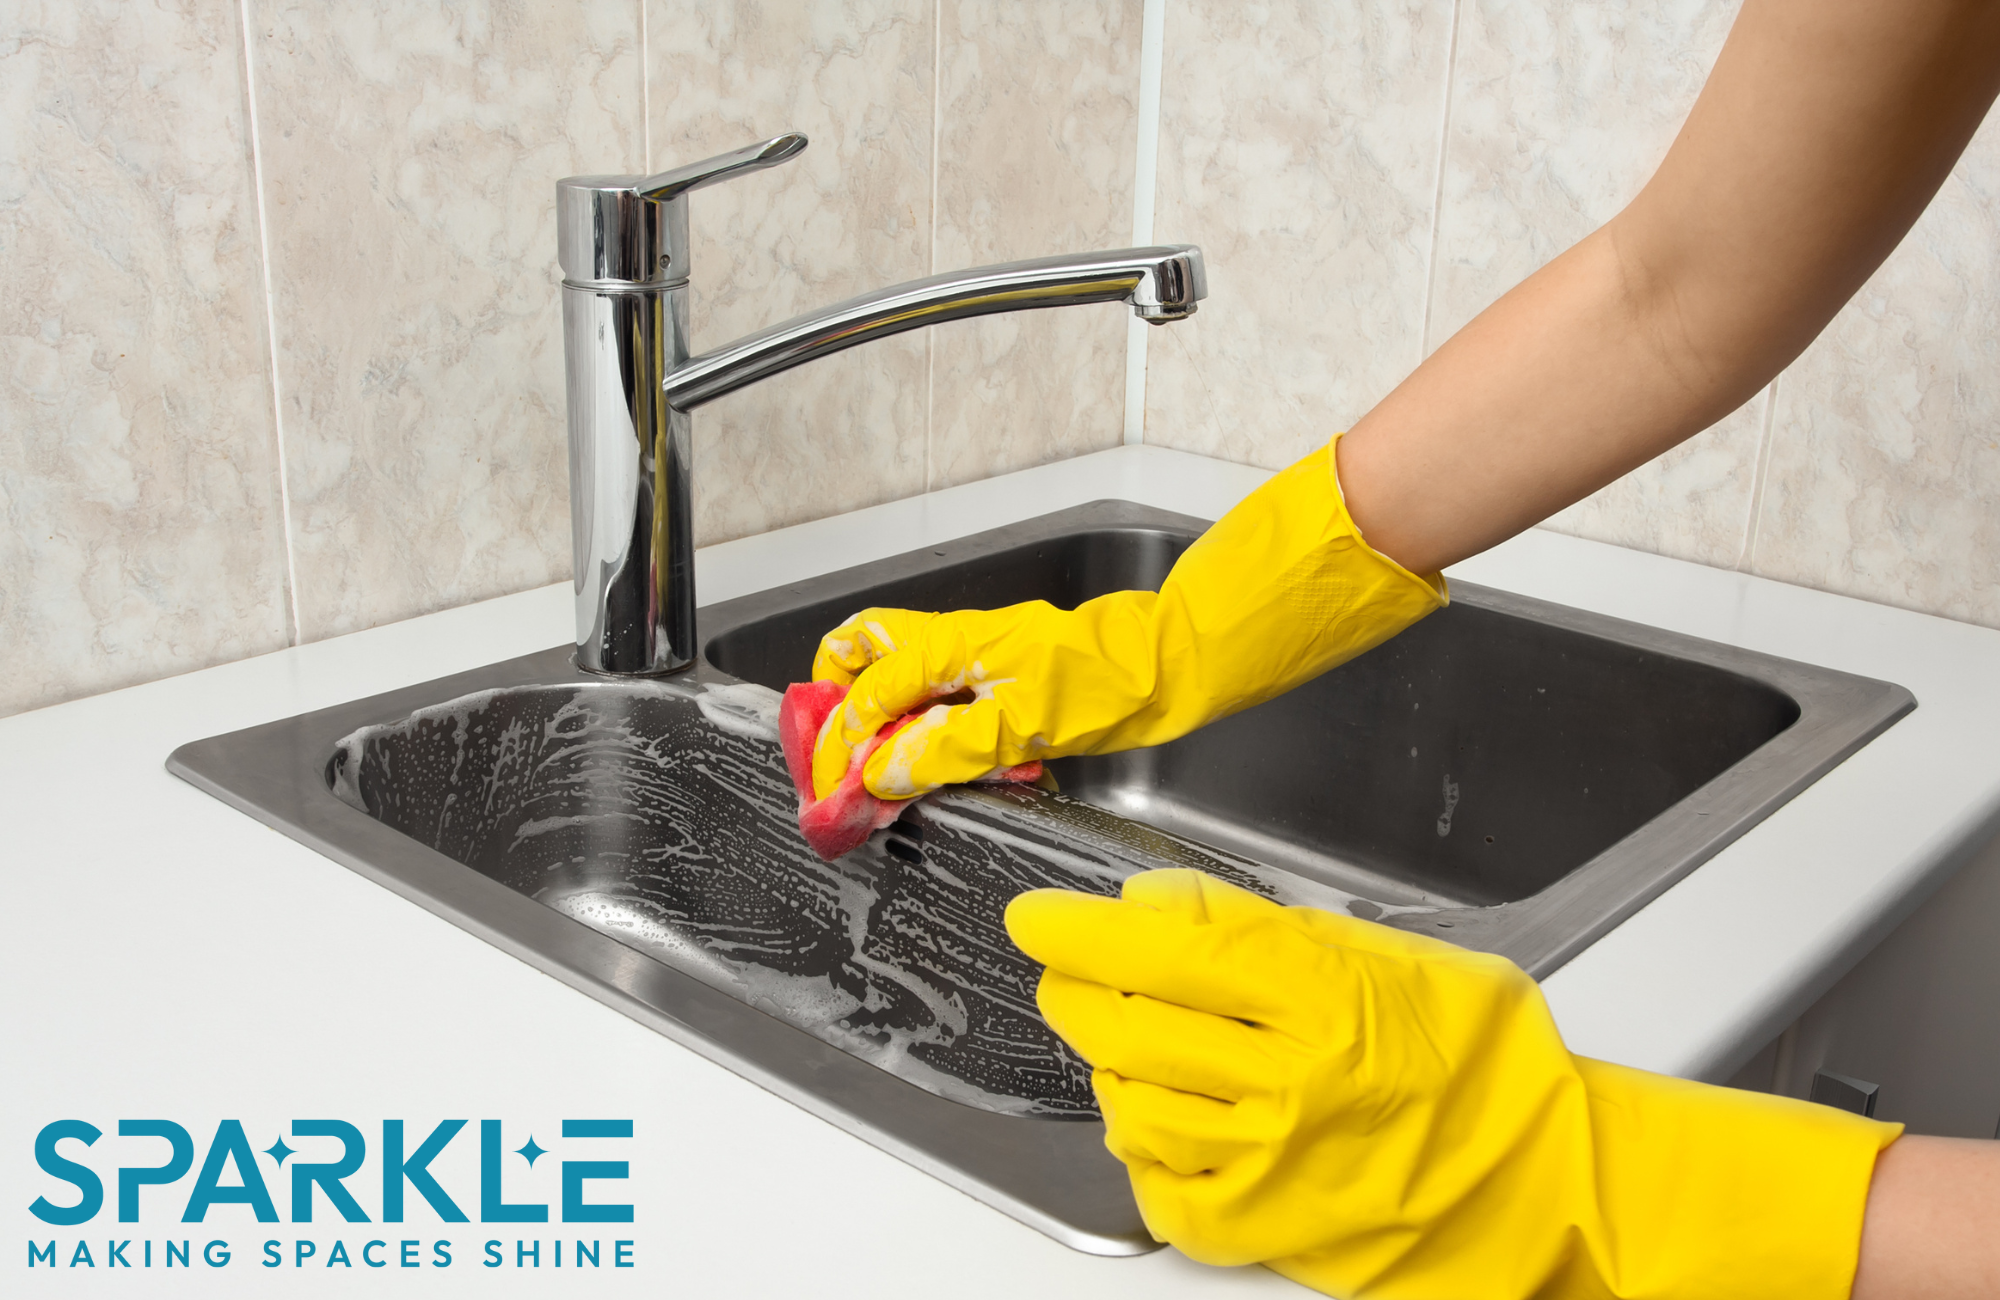 {alt=Blog How to Clean Your Kitchen Sink graphics , height=1300, max_height=1300, max_width=2000, src=https://24123253.fs1.hubspotusercontent-na1.net/hubfs/24123253/Blog%20How%20to%20Clean%20Your%20Kitchen%20Sink%20graphics%20.png, width=2000, size_type=auto, loading=lazy}